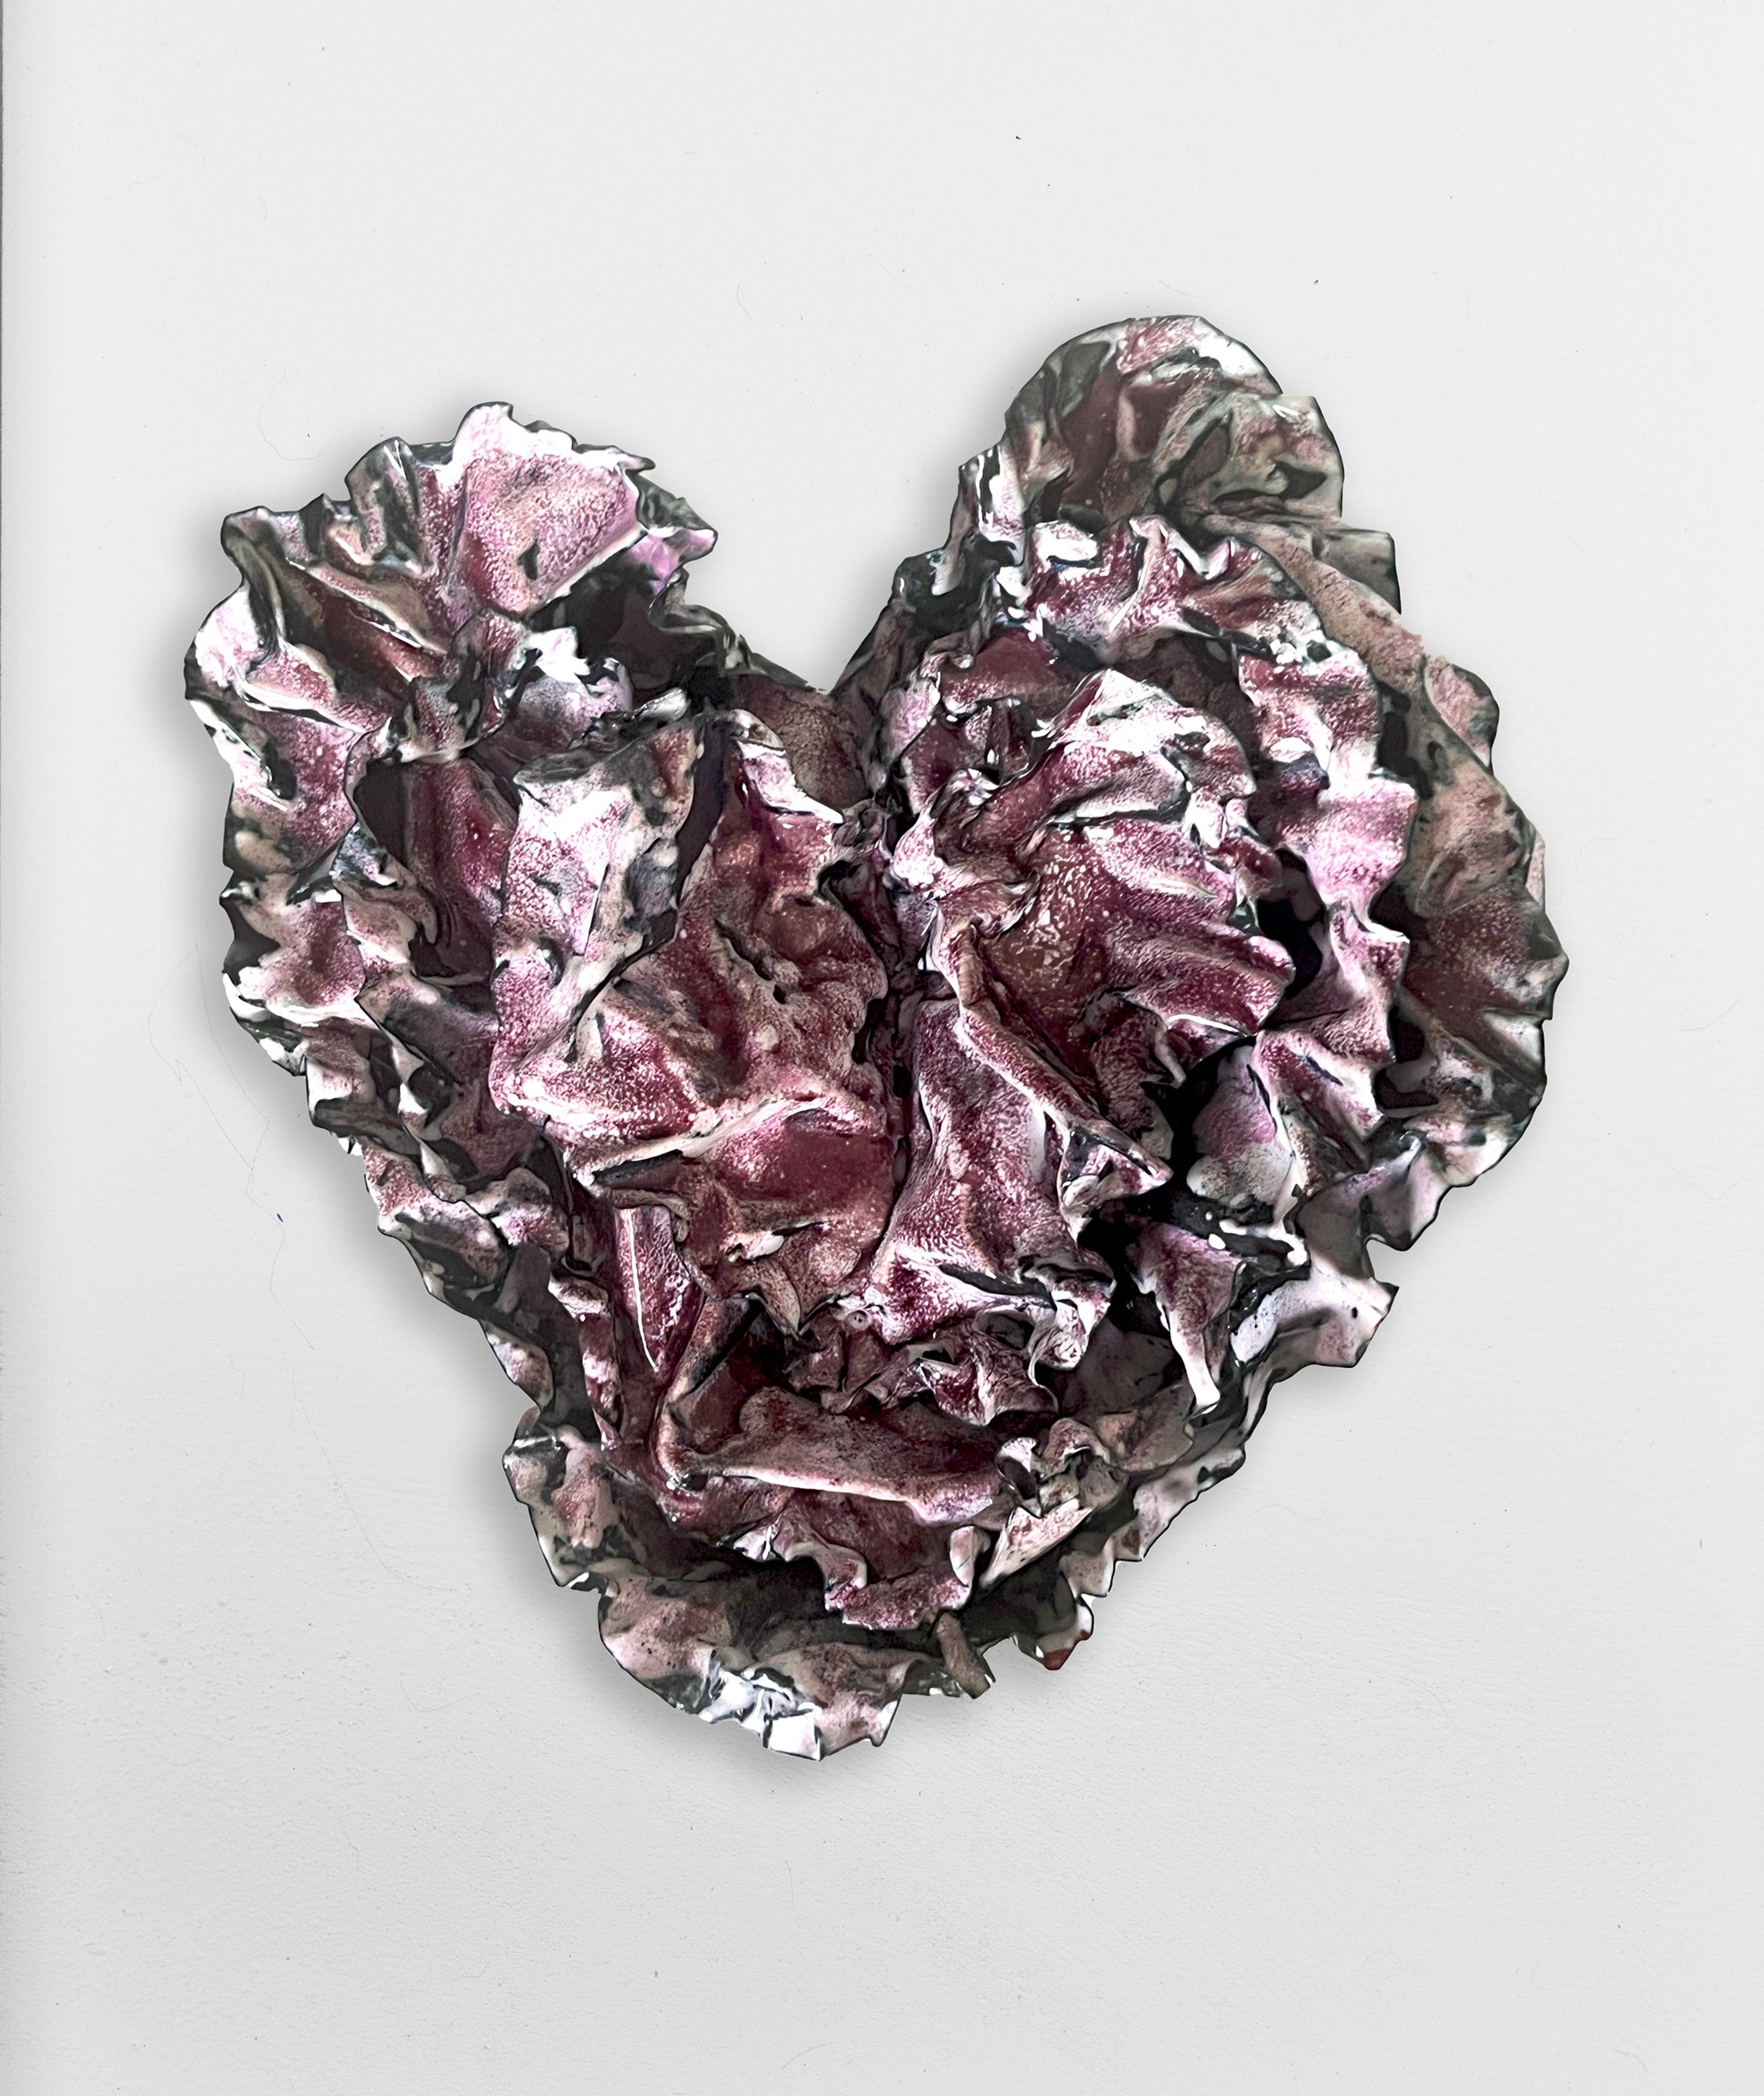 Enhance Your Home with the Magenta Heart: A Stunning Abstract Heart Sculpture
Love, Abstraction, Fine Art -  